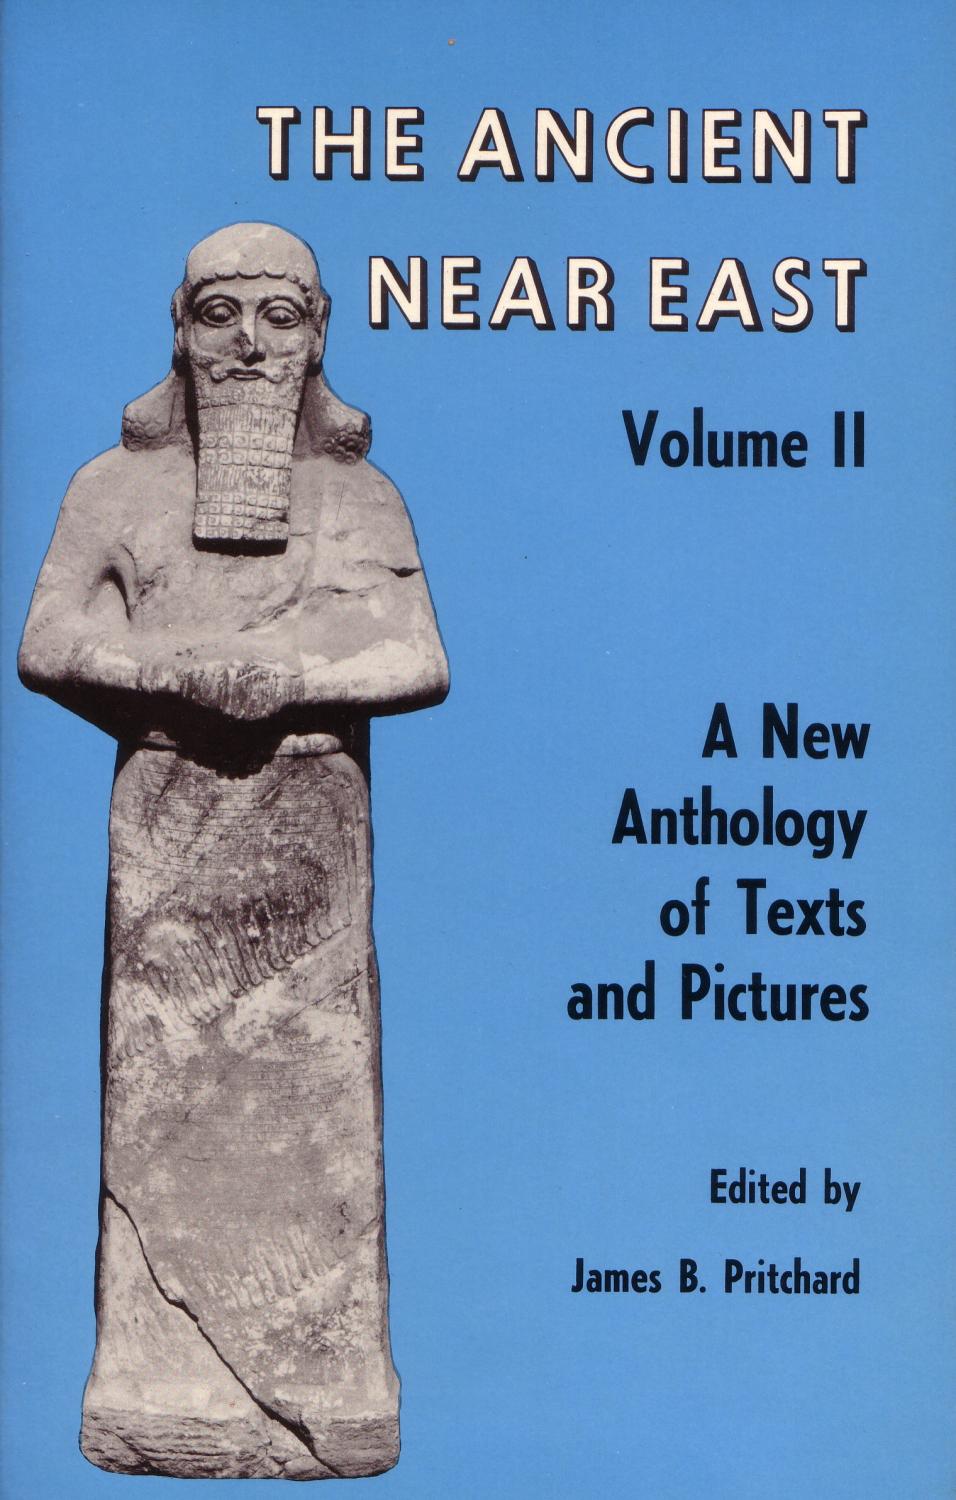 The Ancient Near East. Volume I. Anm Anthology of Text and Pictures. Volume II. A New Anthology of Texts and Pictures.